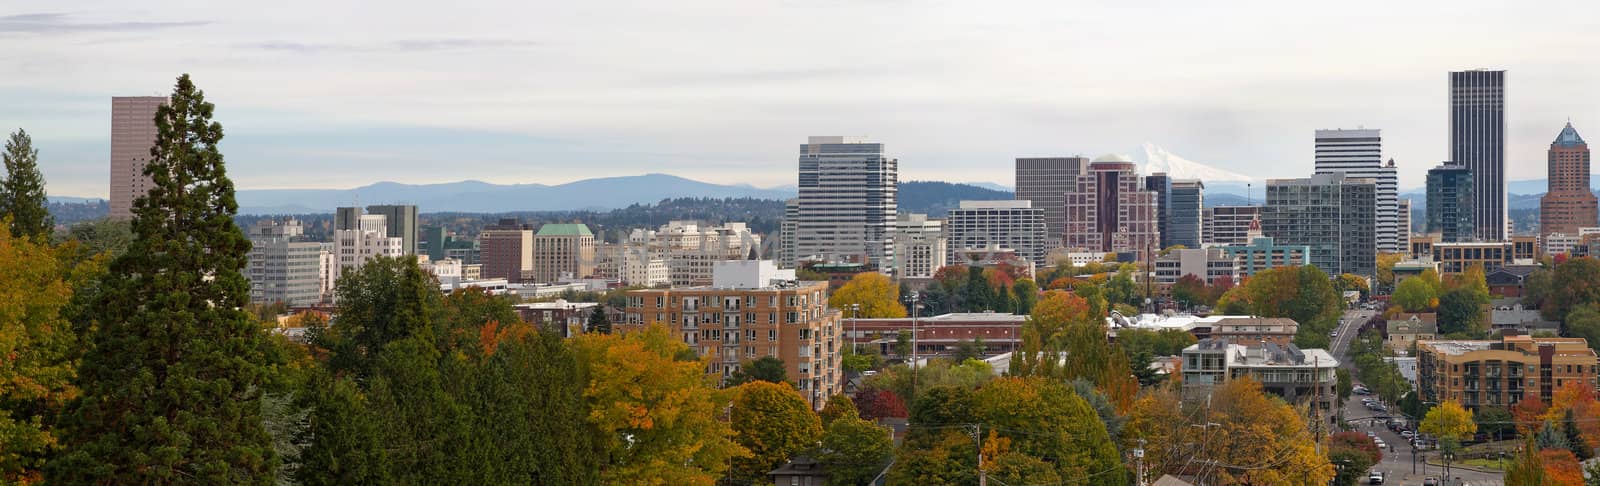 Portland Oregon Downtown City Skyline Panorama View in Fall